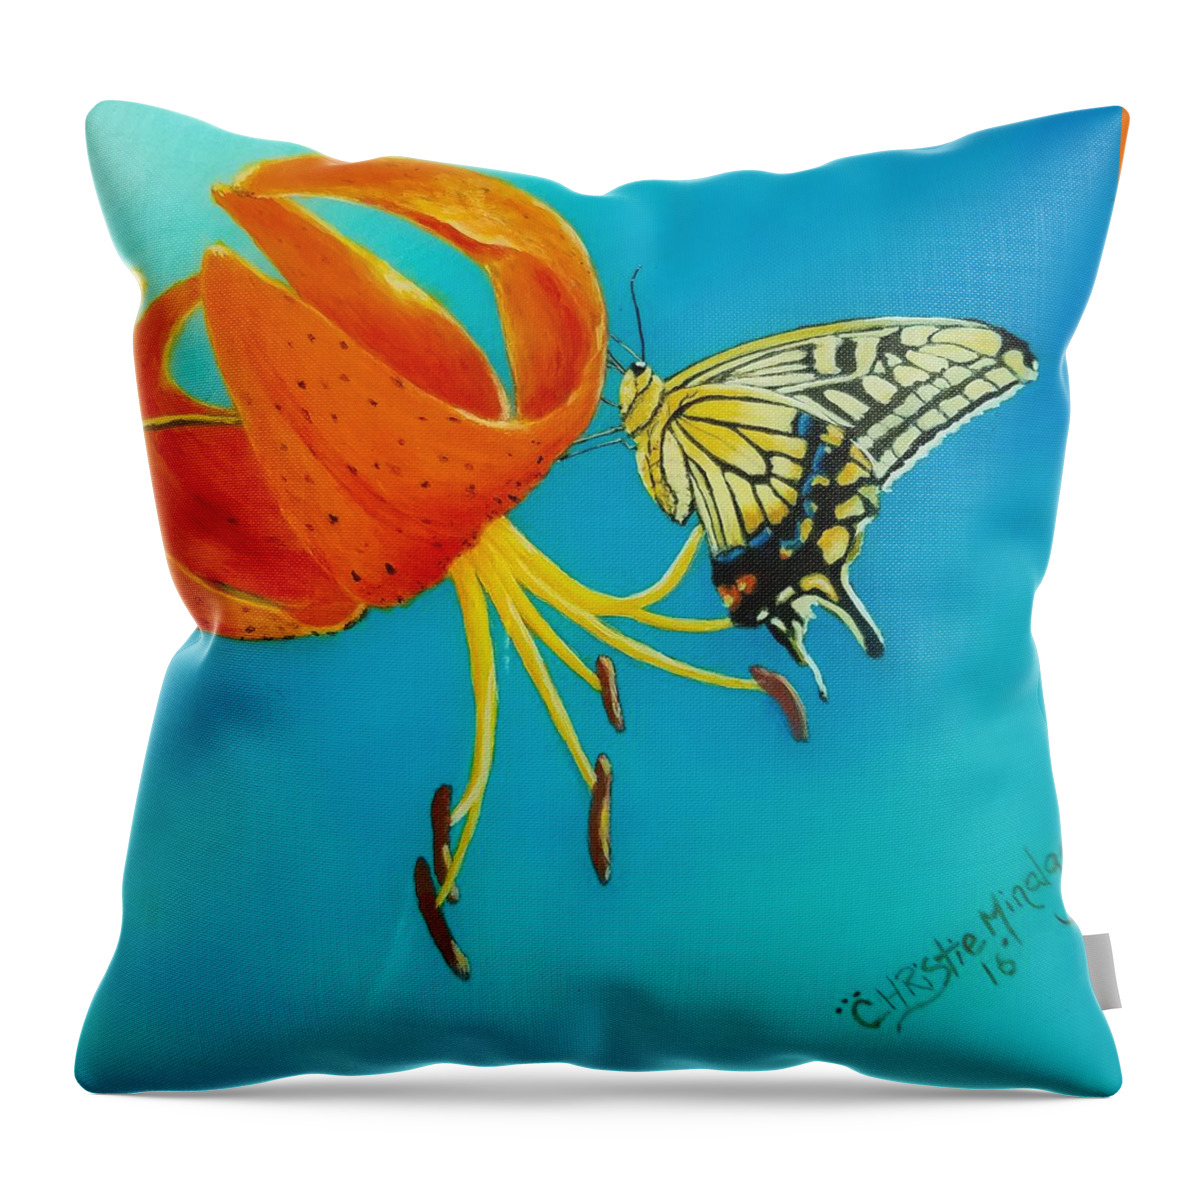 Yellow Butterfly Throw Pillow featuring the painting Nectar by Christie Minalga